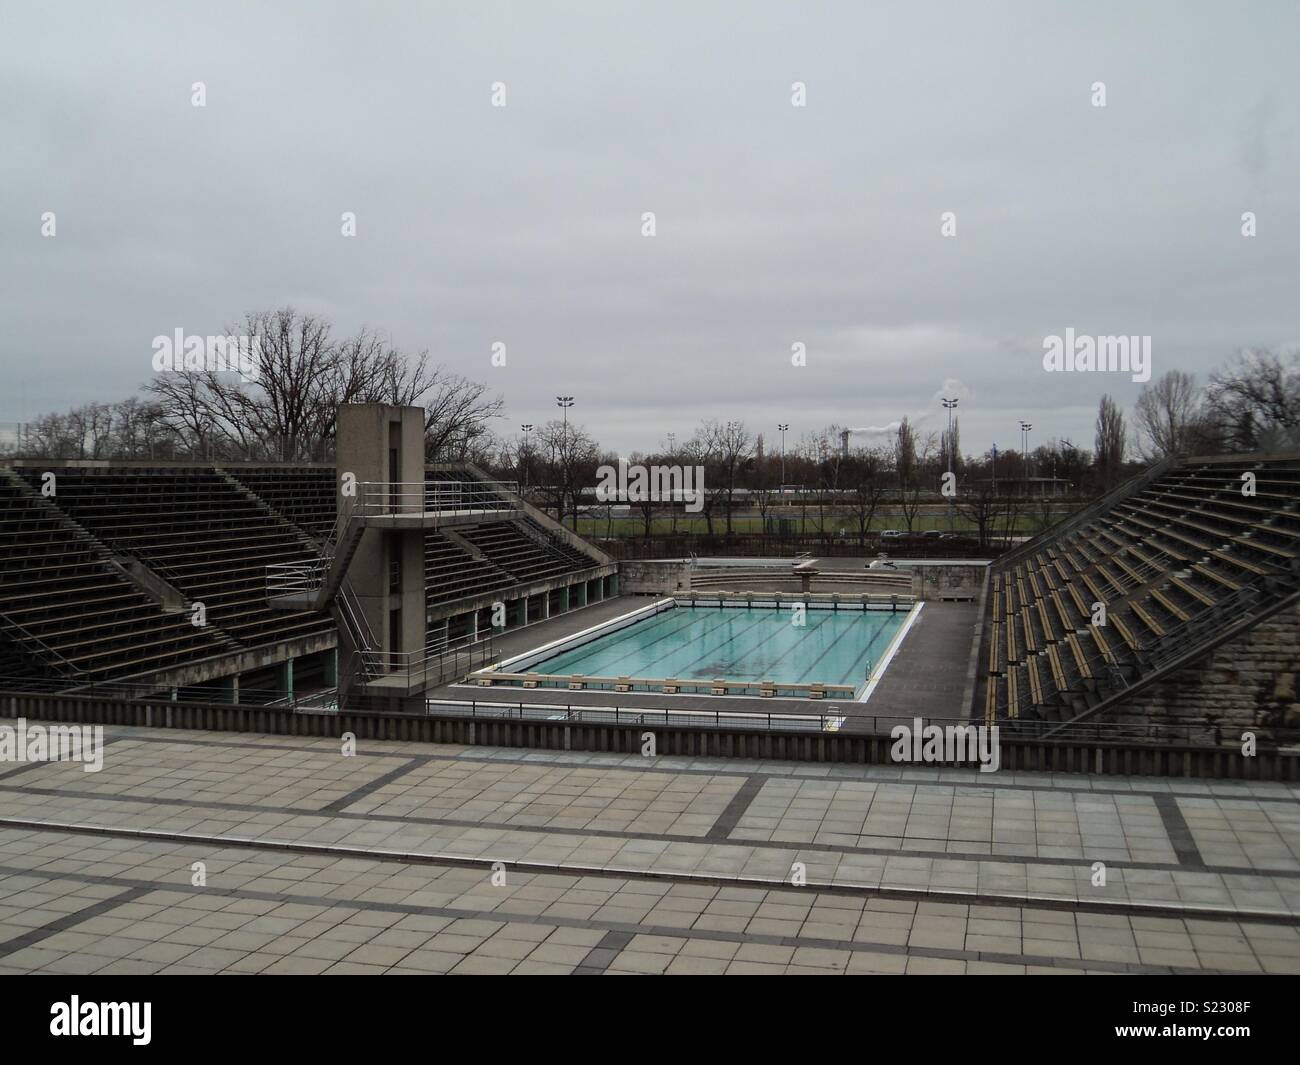 Outdoor Swimming Pool at Olympiastadion, Berlin, Germany Stock Photo